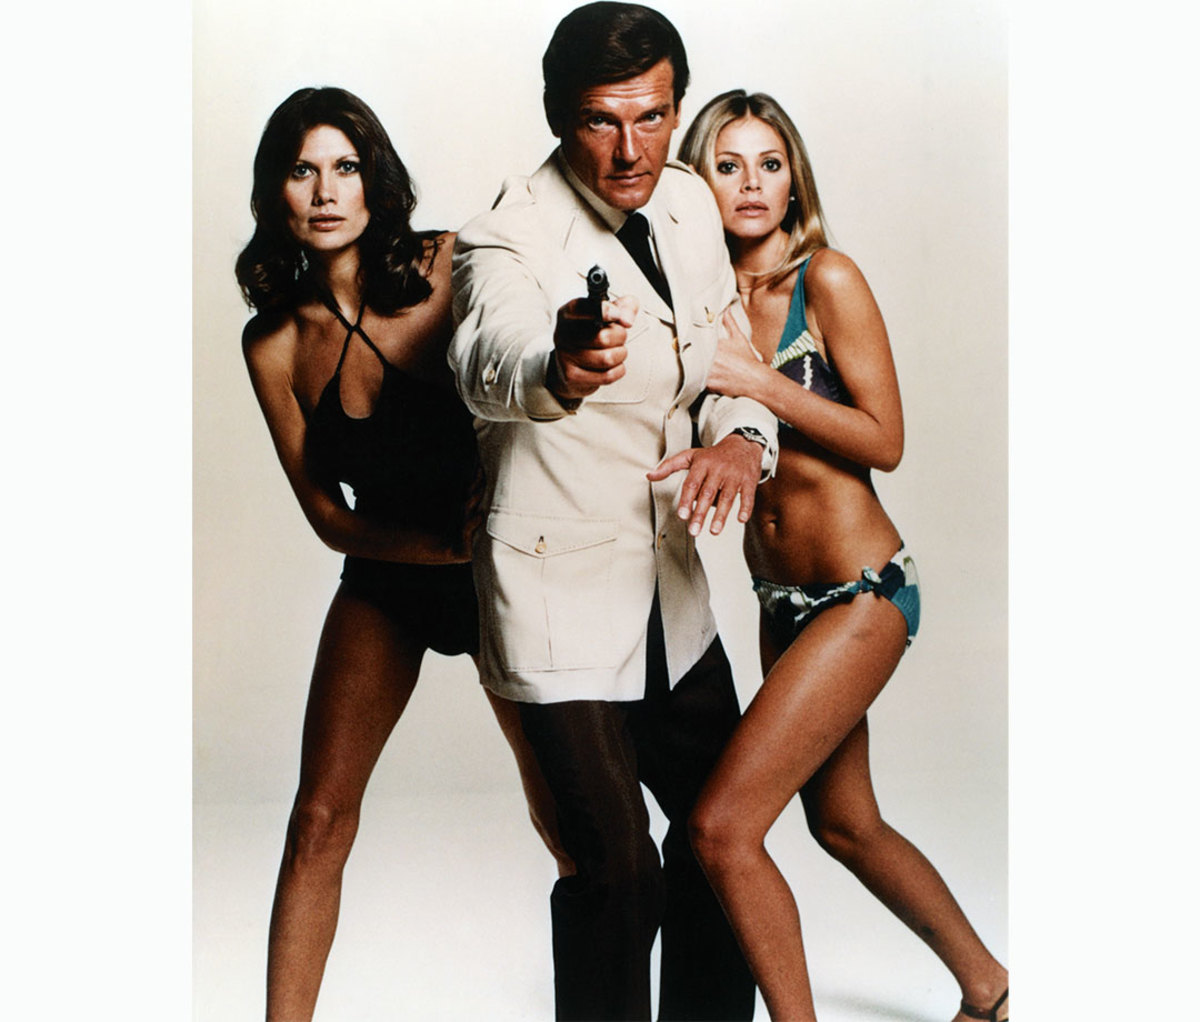 Maud Adams, Roger Moore, and Britt Ekland in 'The Man with the Golden Gun'